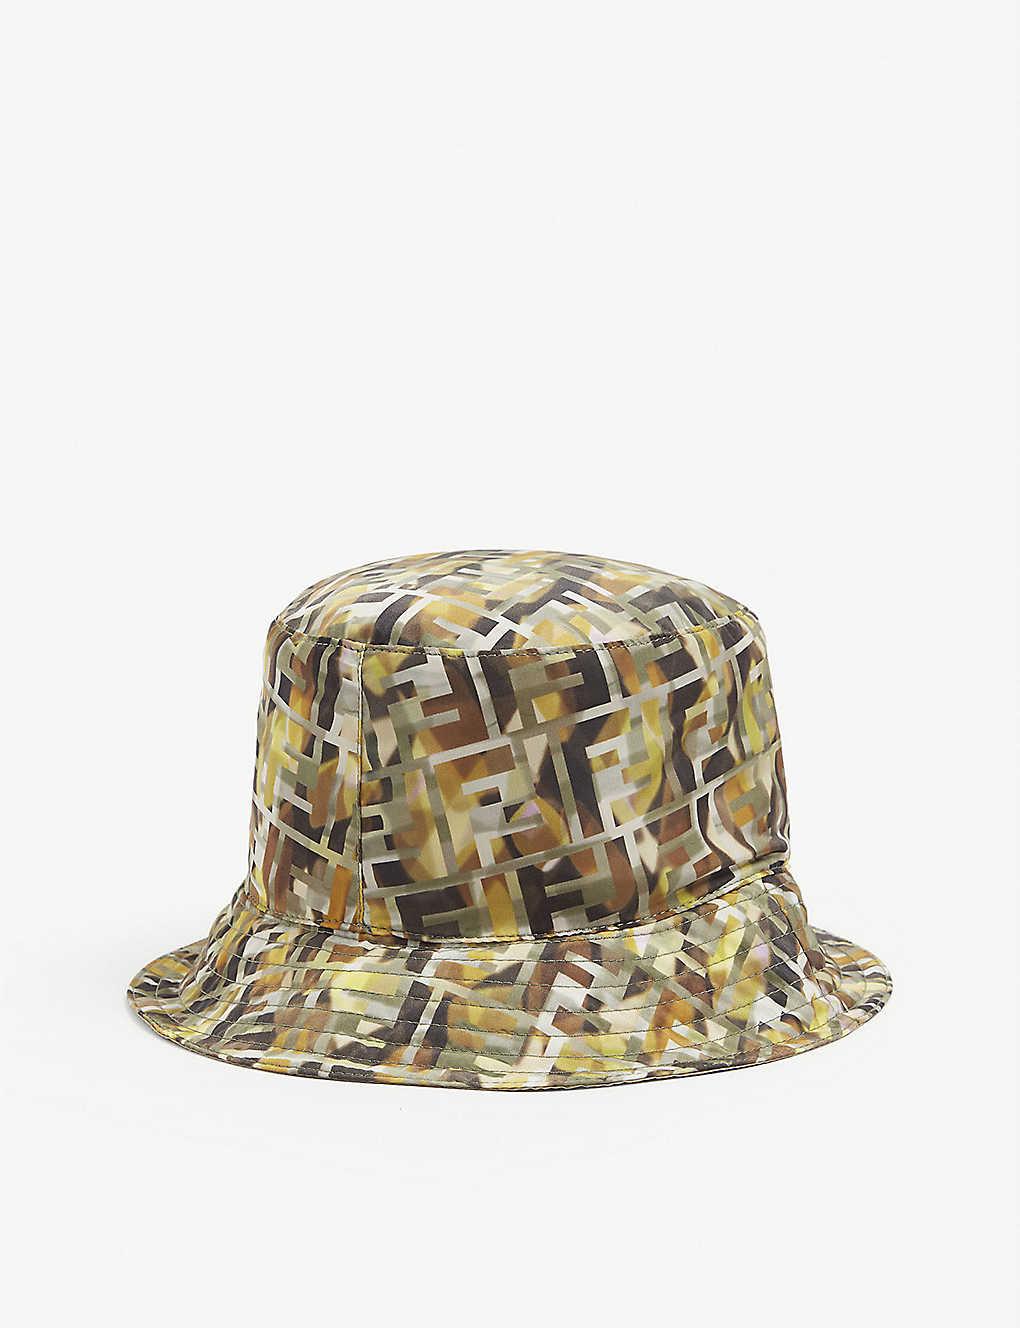 Fendi Synthetic Ff Camouflage-print Bucket Hat in Green for Men - Lyst